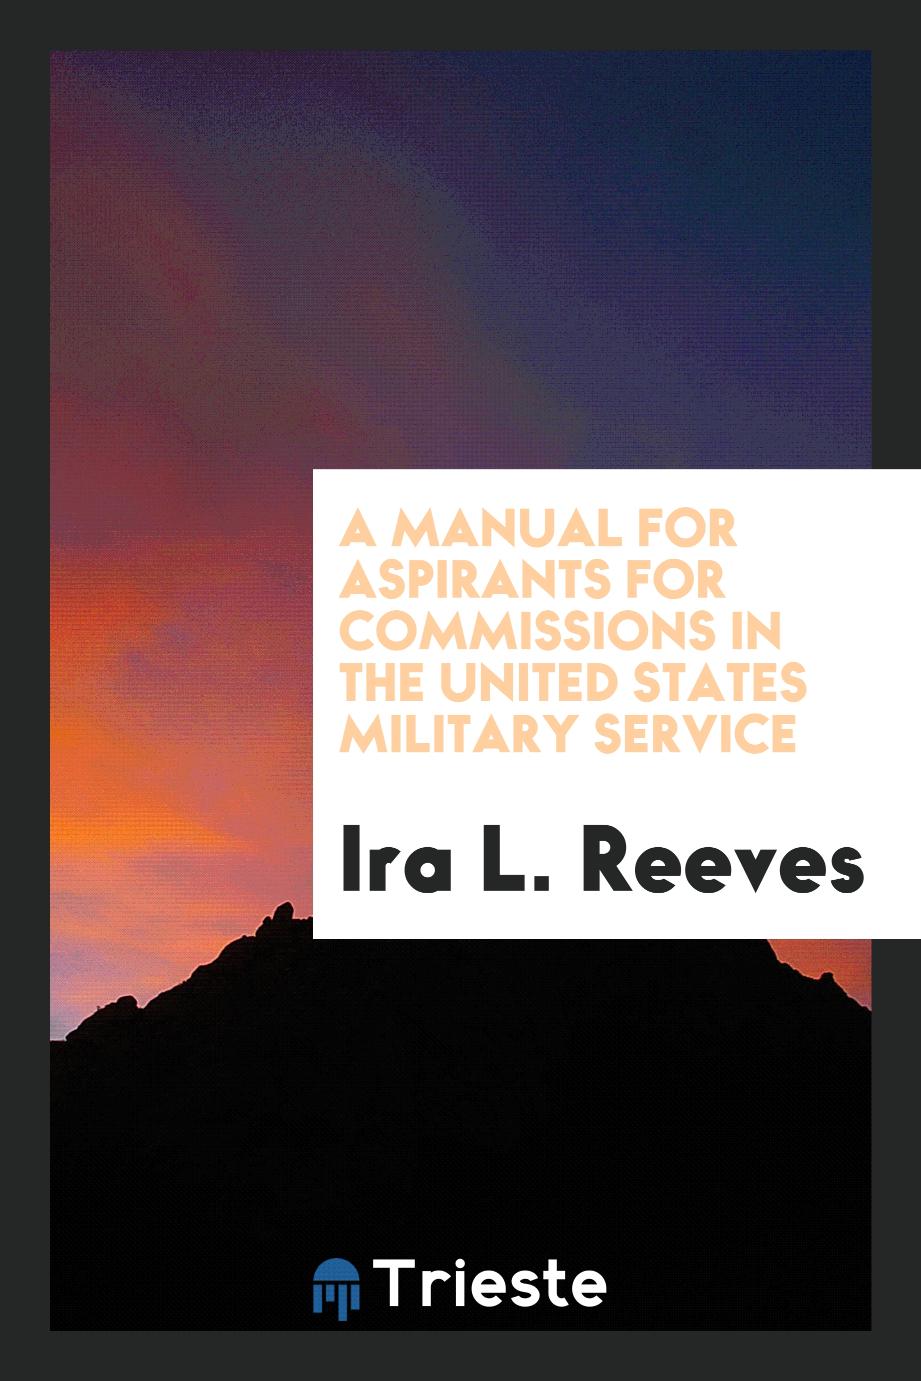 A manual for aspirants for commissions in the United States military service